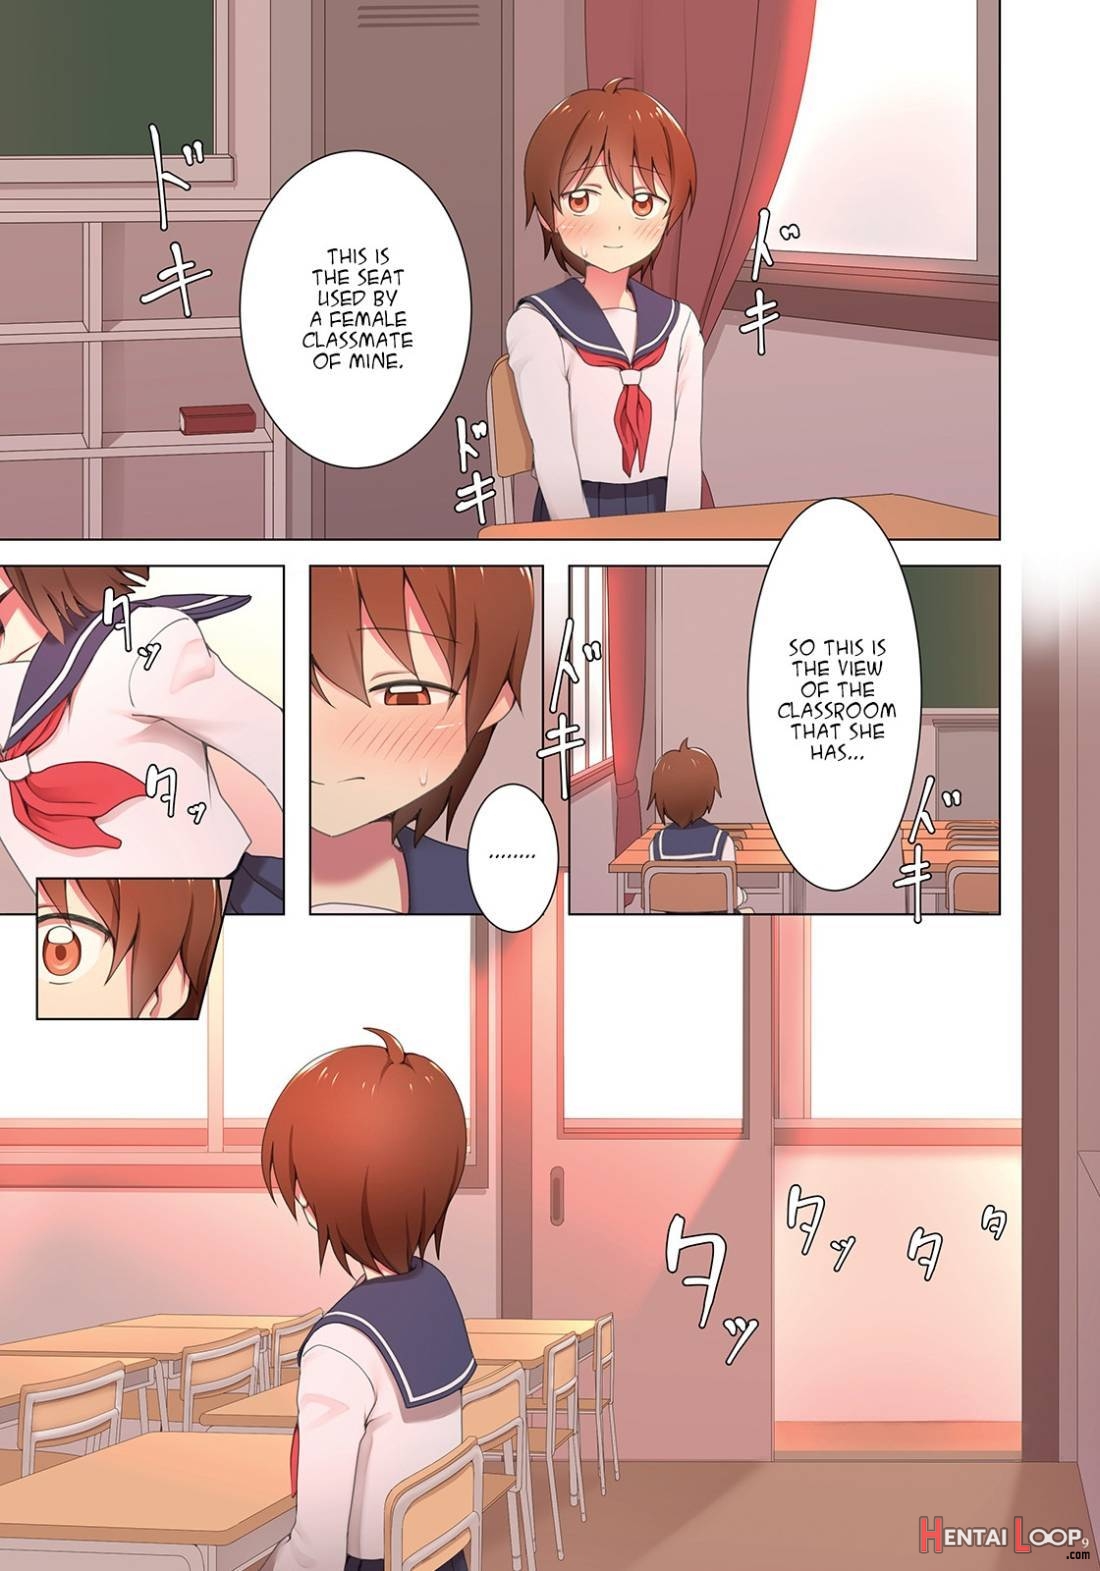 The Crossdressing Adventure in the School Building at Sunset page 9